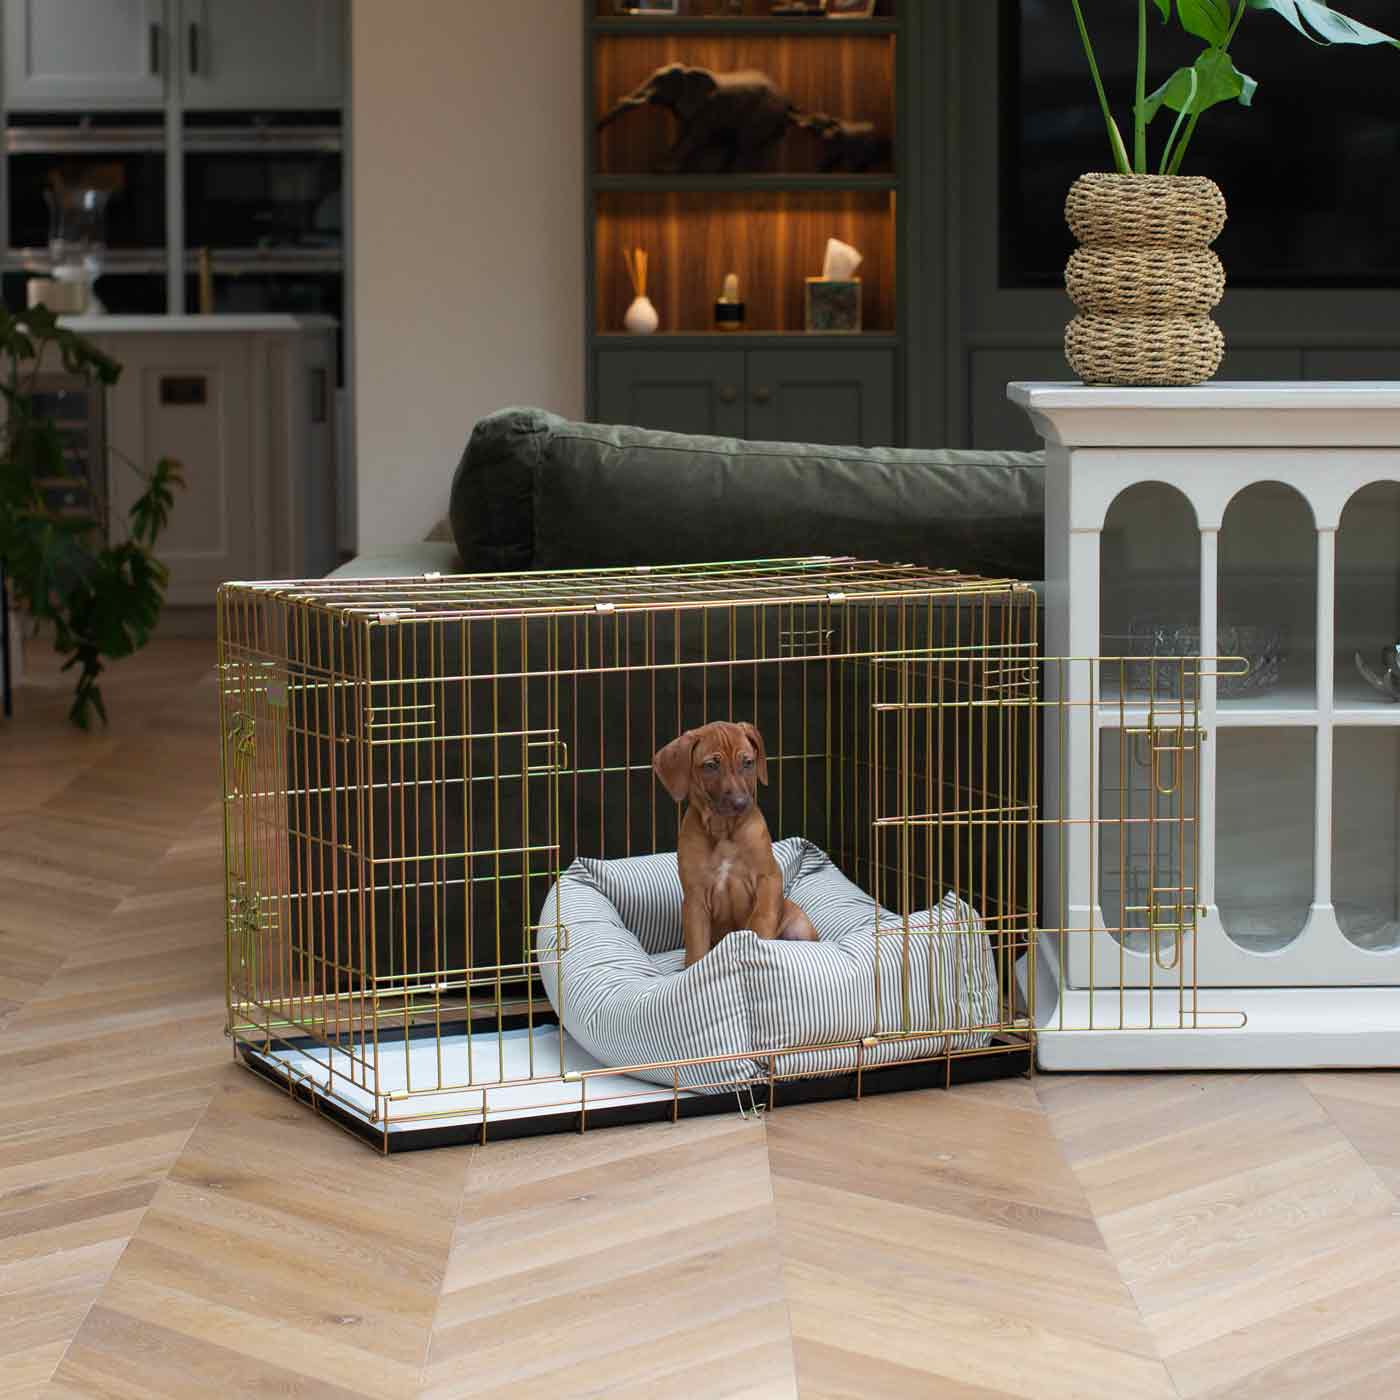 Luxury Gold Dog Cage With Cozy & Calm Puppy Cage Dog Bed, The Perfect Dog Crate For The Ultimate Naptime, Available Now at Lords & Labradors US